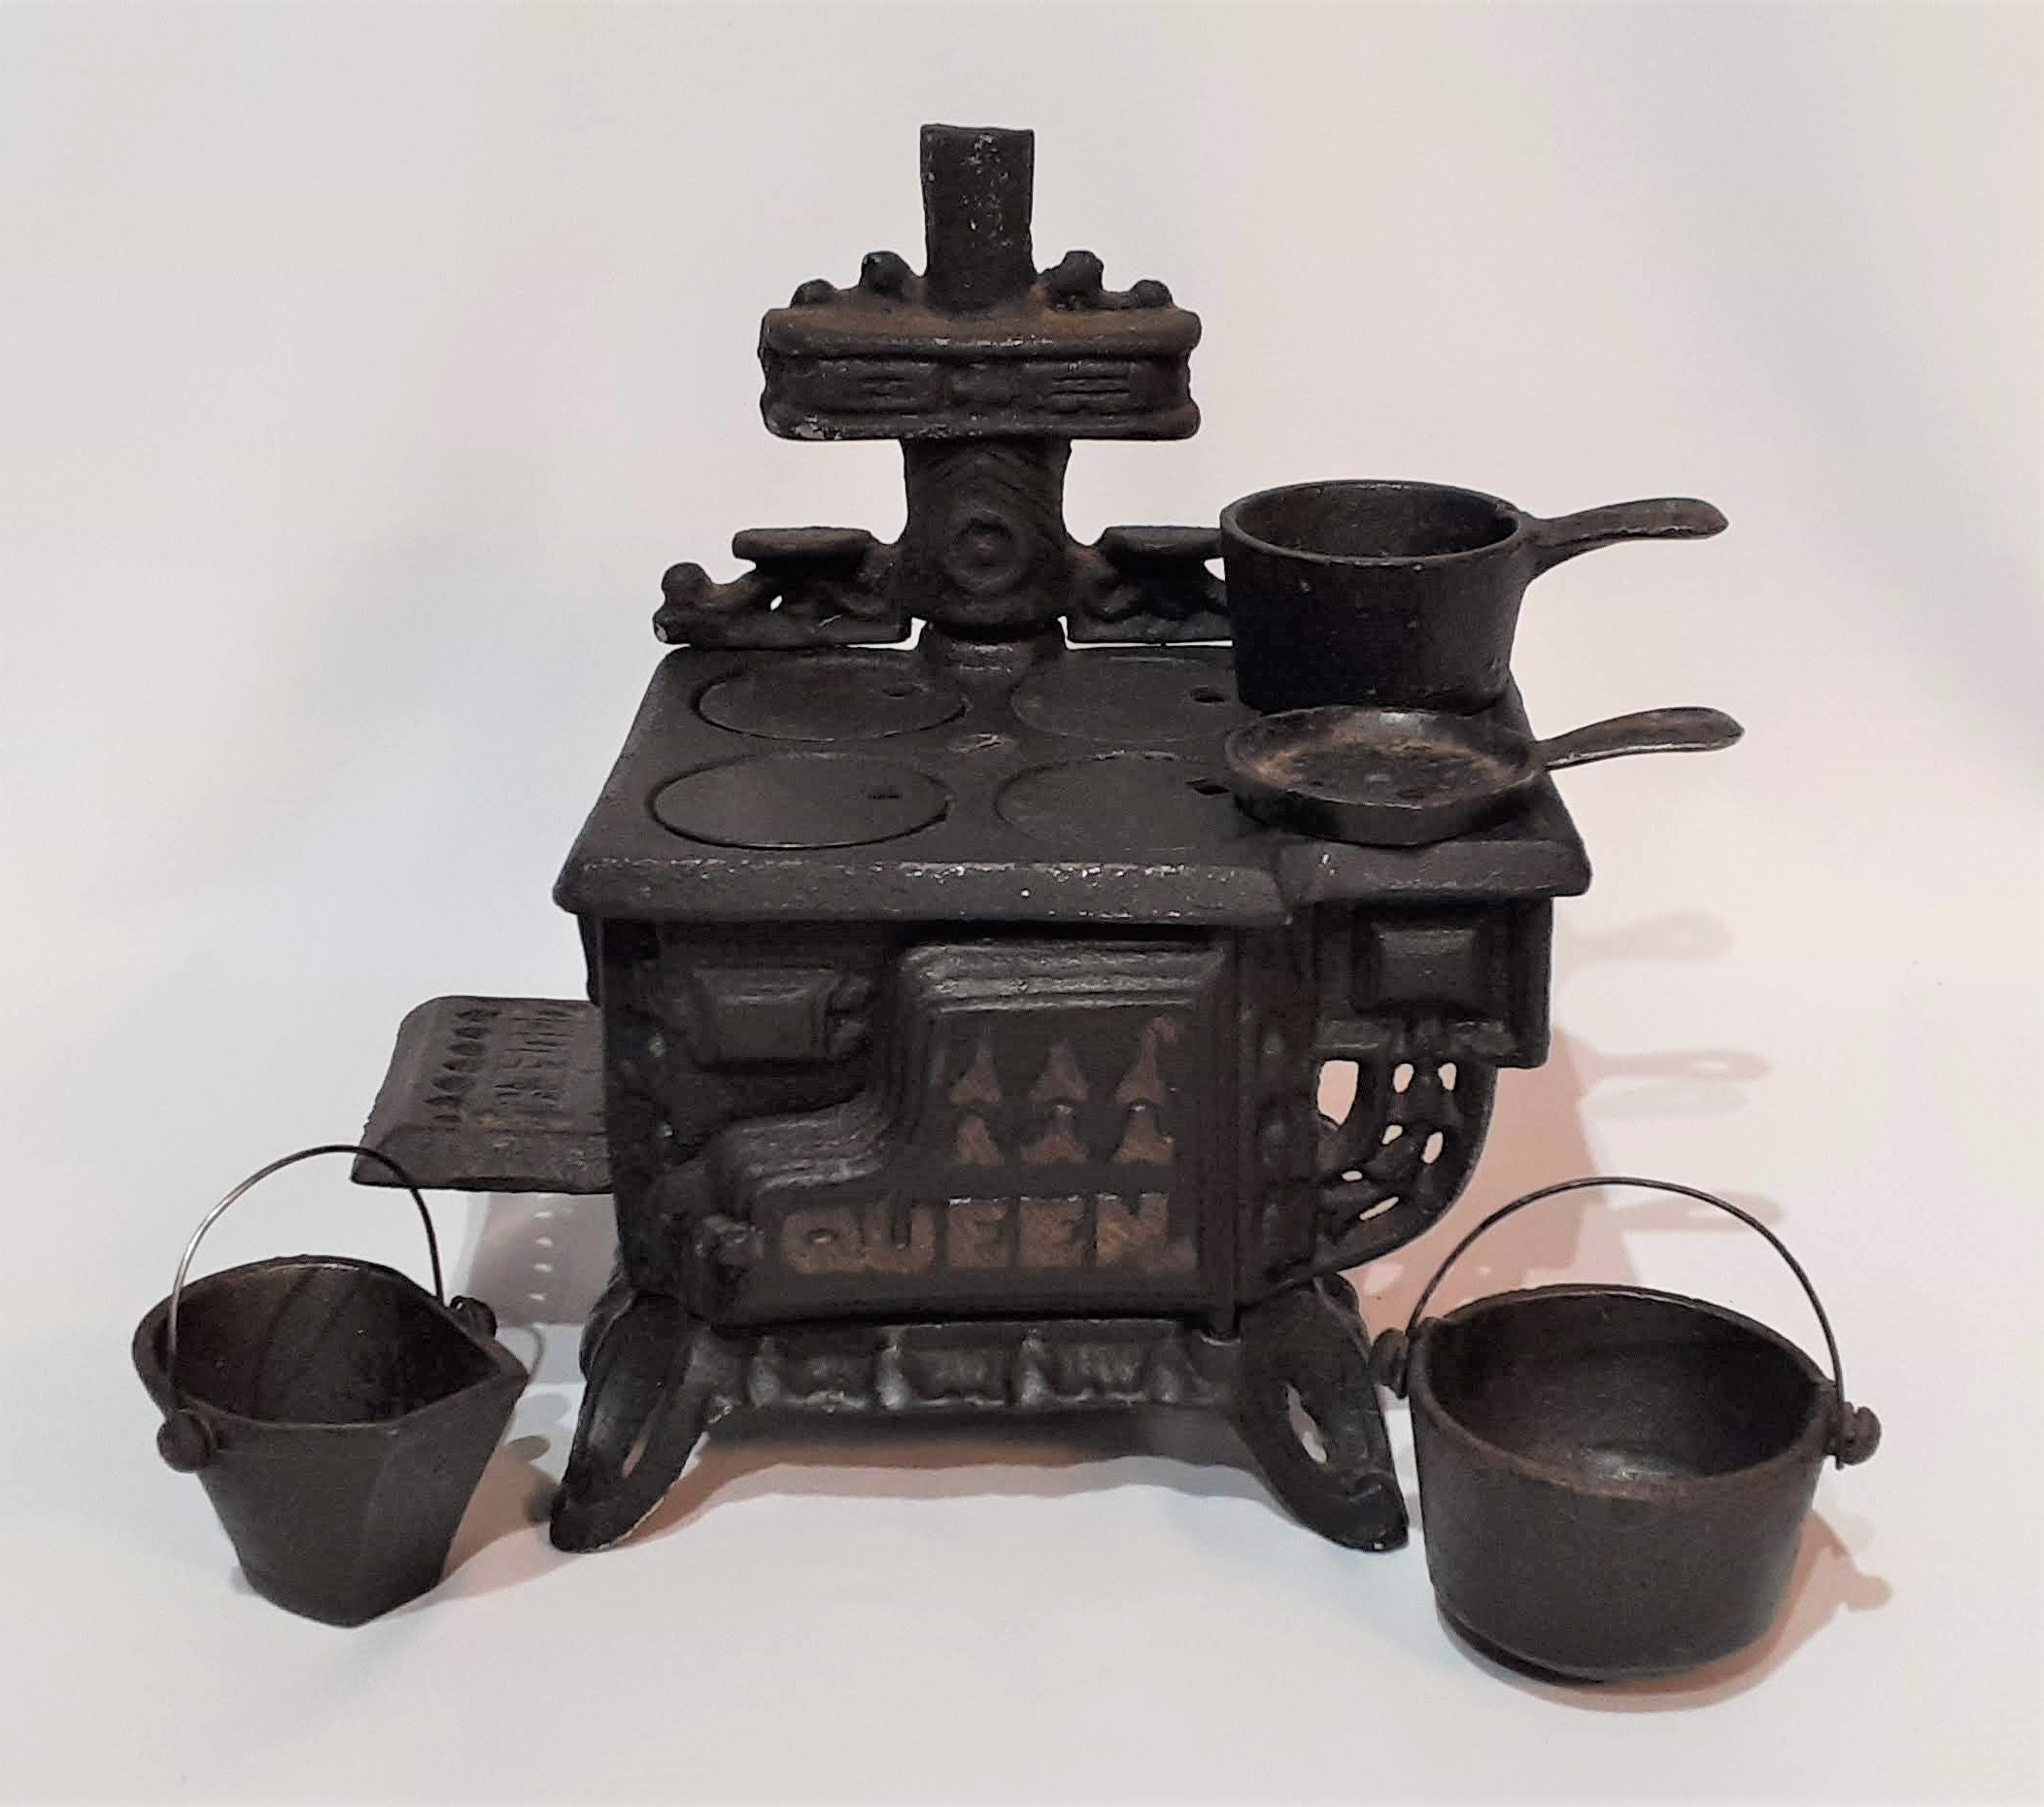 Old toy stoves: kids used to cook with cast-iron heated by coals